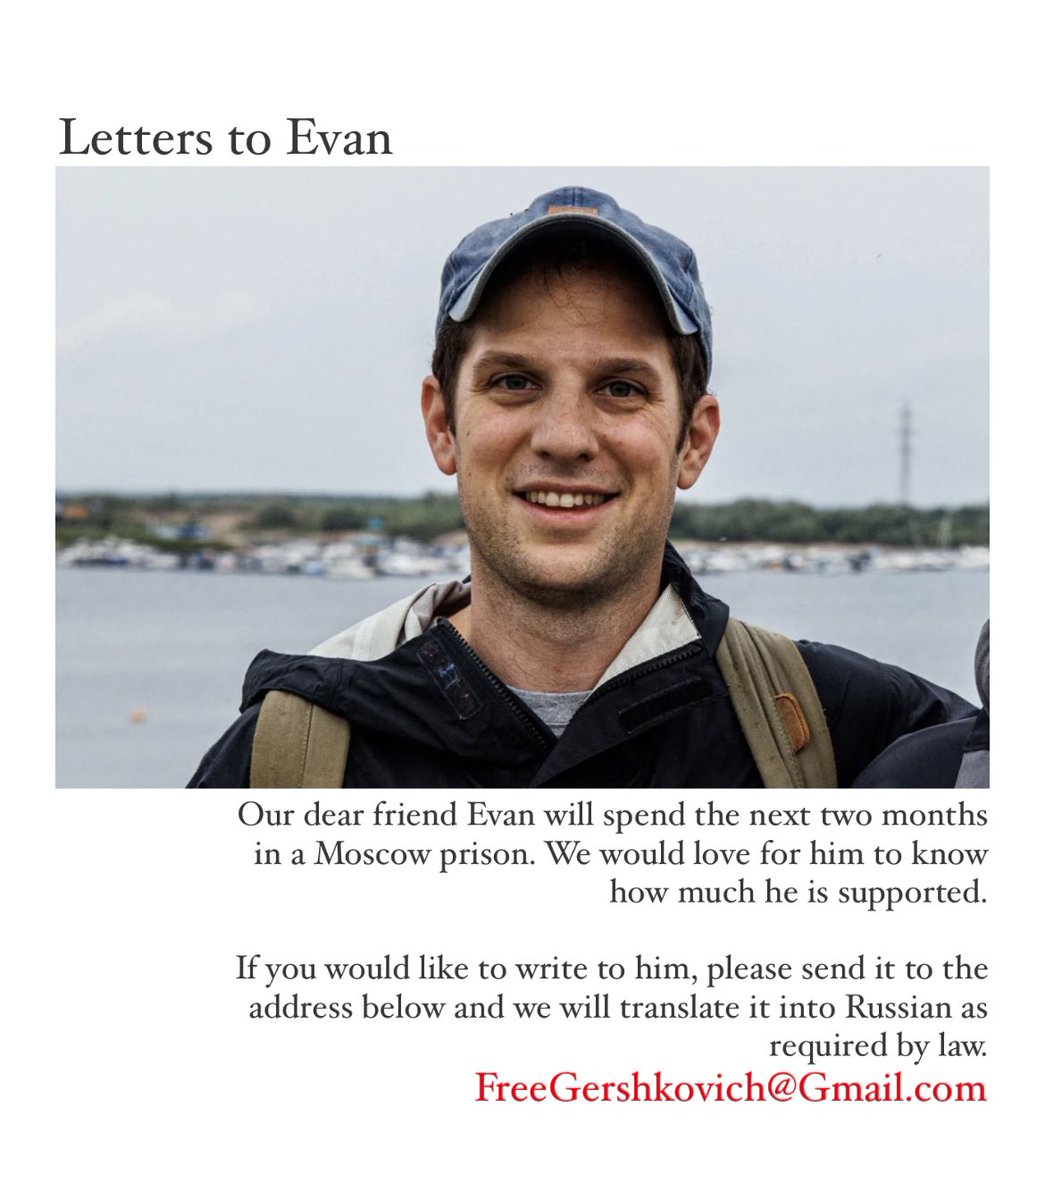 We have received just so so so SO many amazing letters from people all over the world and cannot wait for Evan to read them. Evan Gershkovich is being held hostage and must be freed immediately. JOURNALISM IS NOT A CRIME #FreeEvan